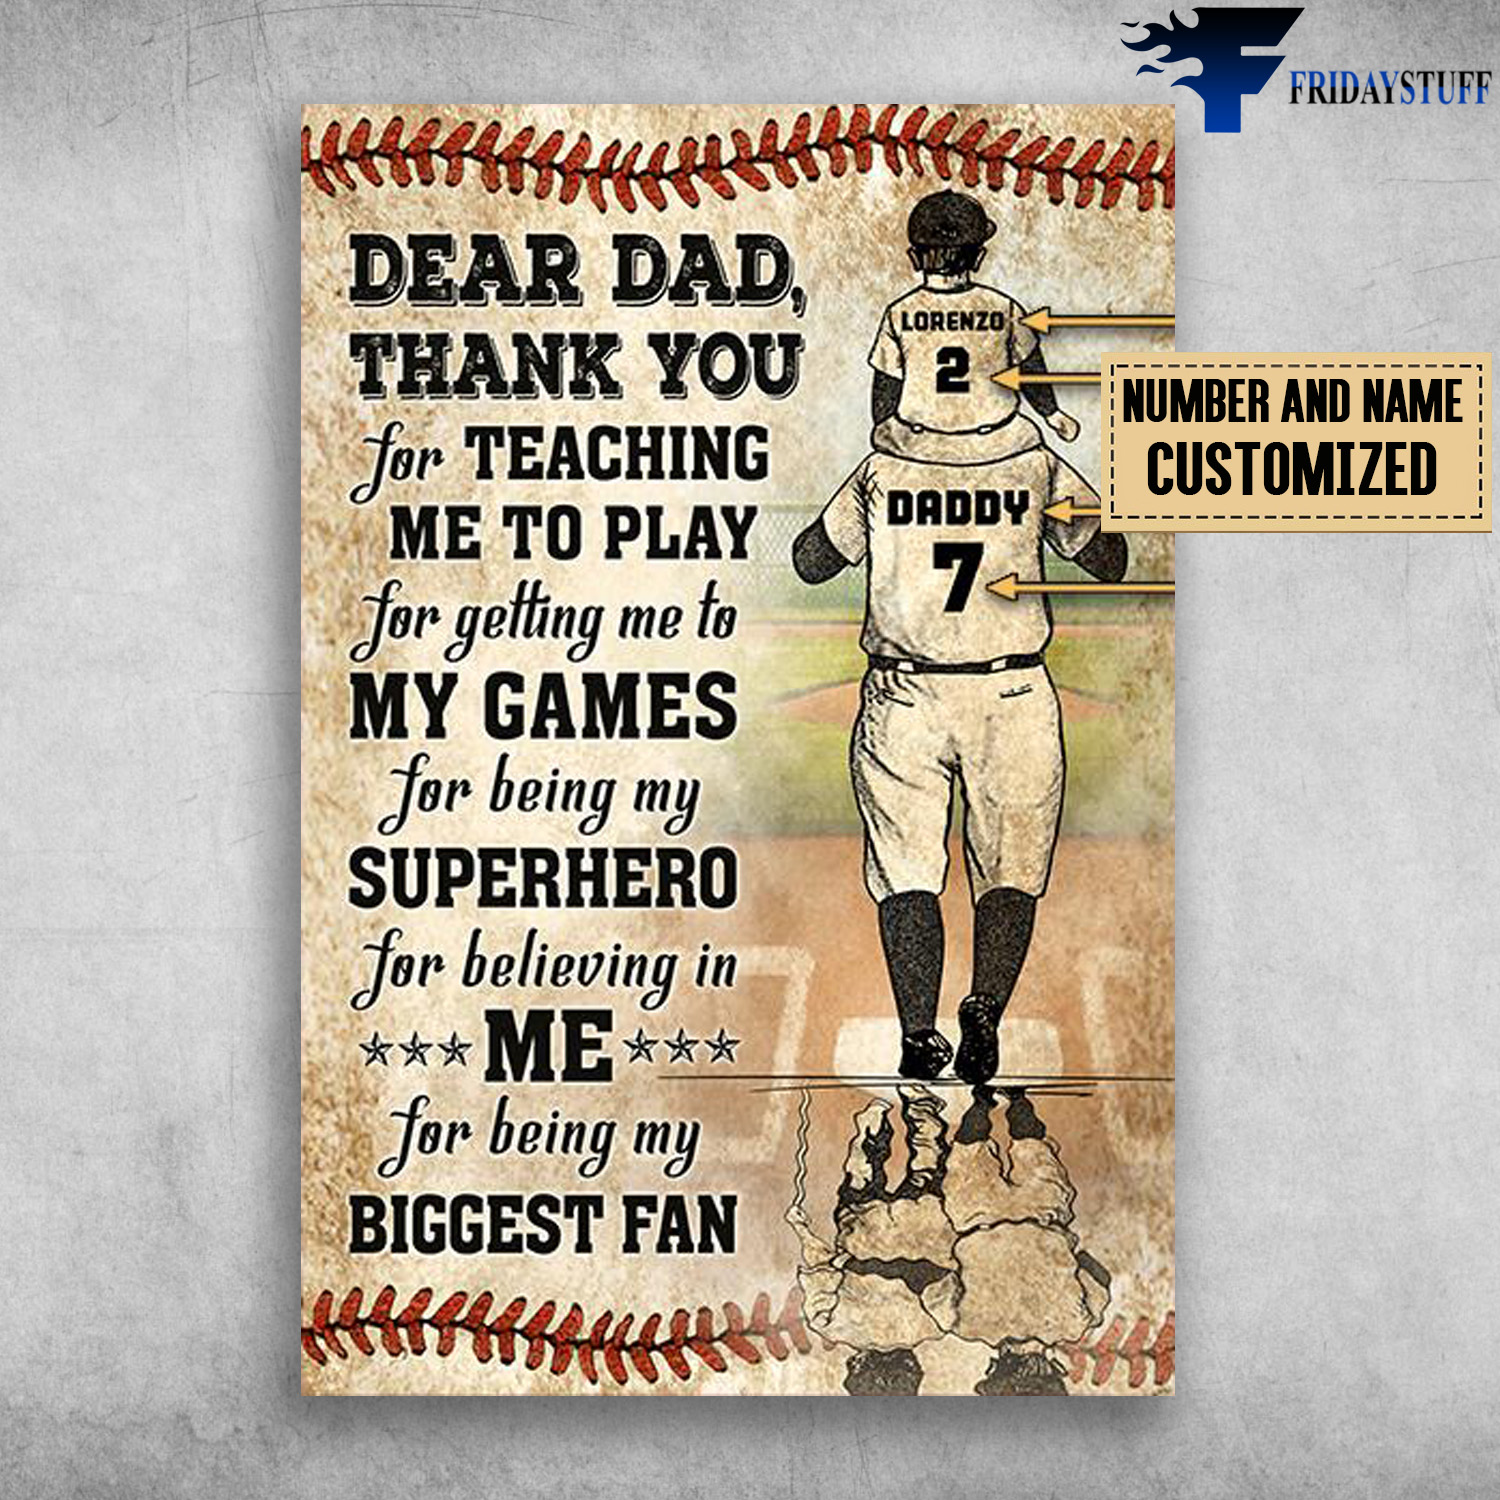 Baseball, Dear Dad, Thank You For Teaching Me, To Play For Getting Me To My Games, For Being My Superhero For Believing In Me, For Biggest Fan